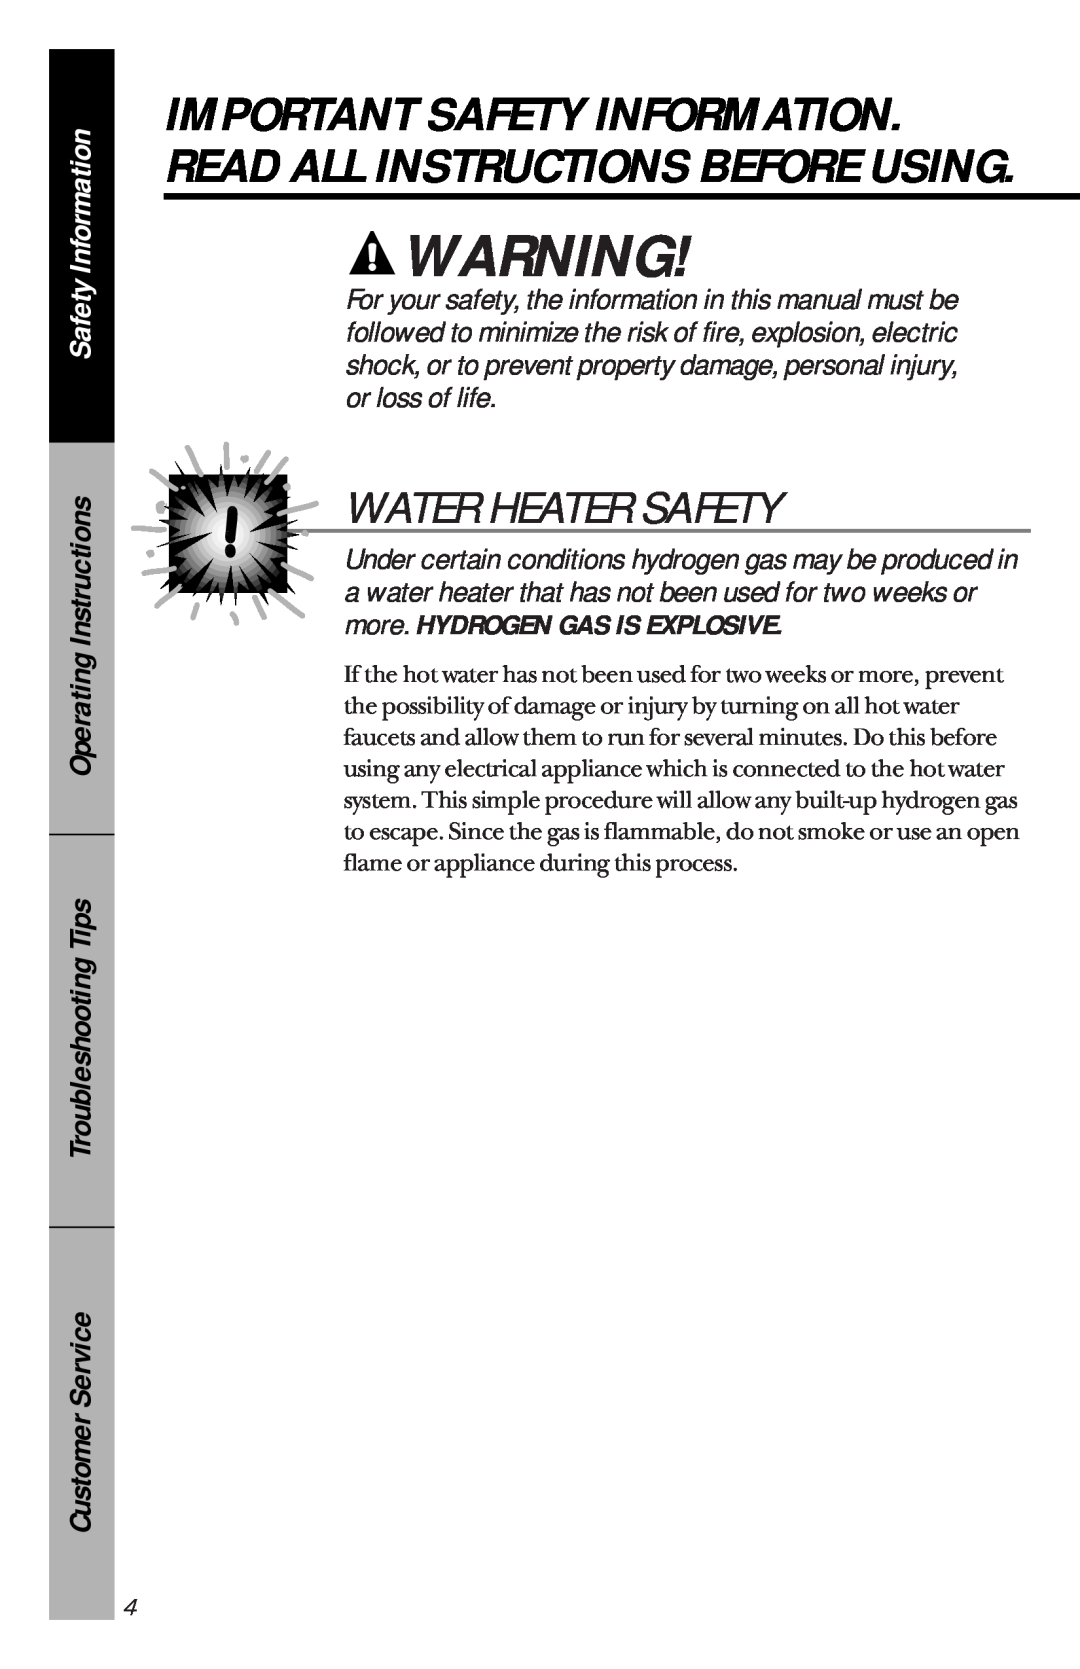 GE GSD1920, GSD3130 Water Heater Safety, Safety Information, Operating Instructions Troubleshooting Tips, Customer Service 